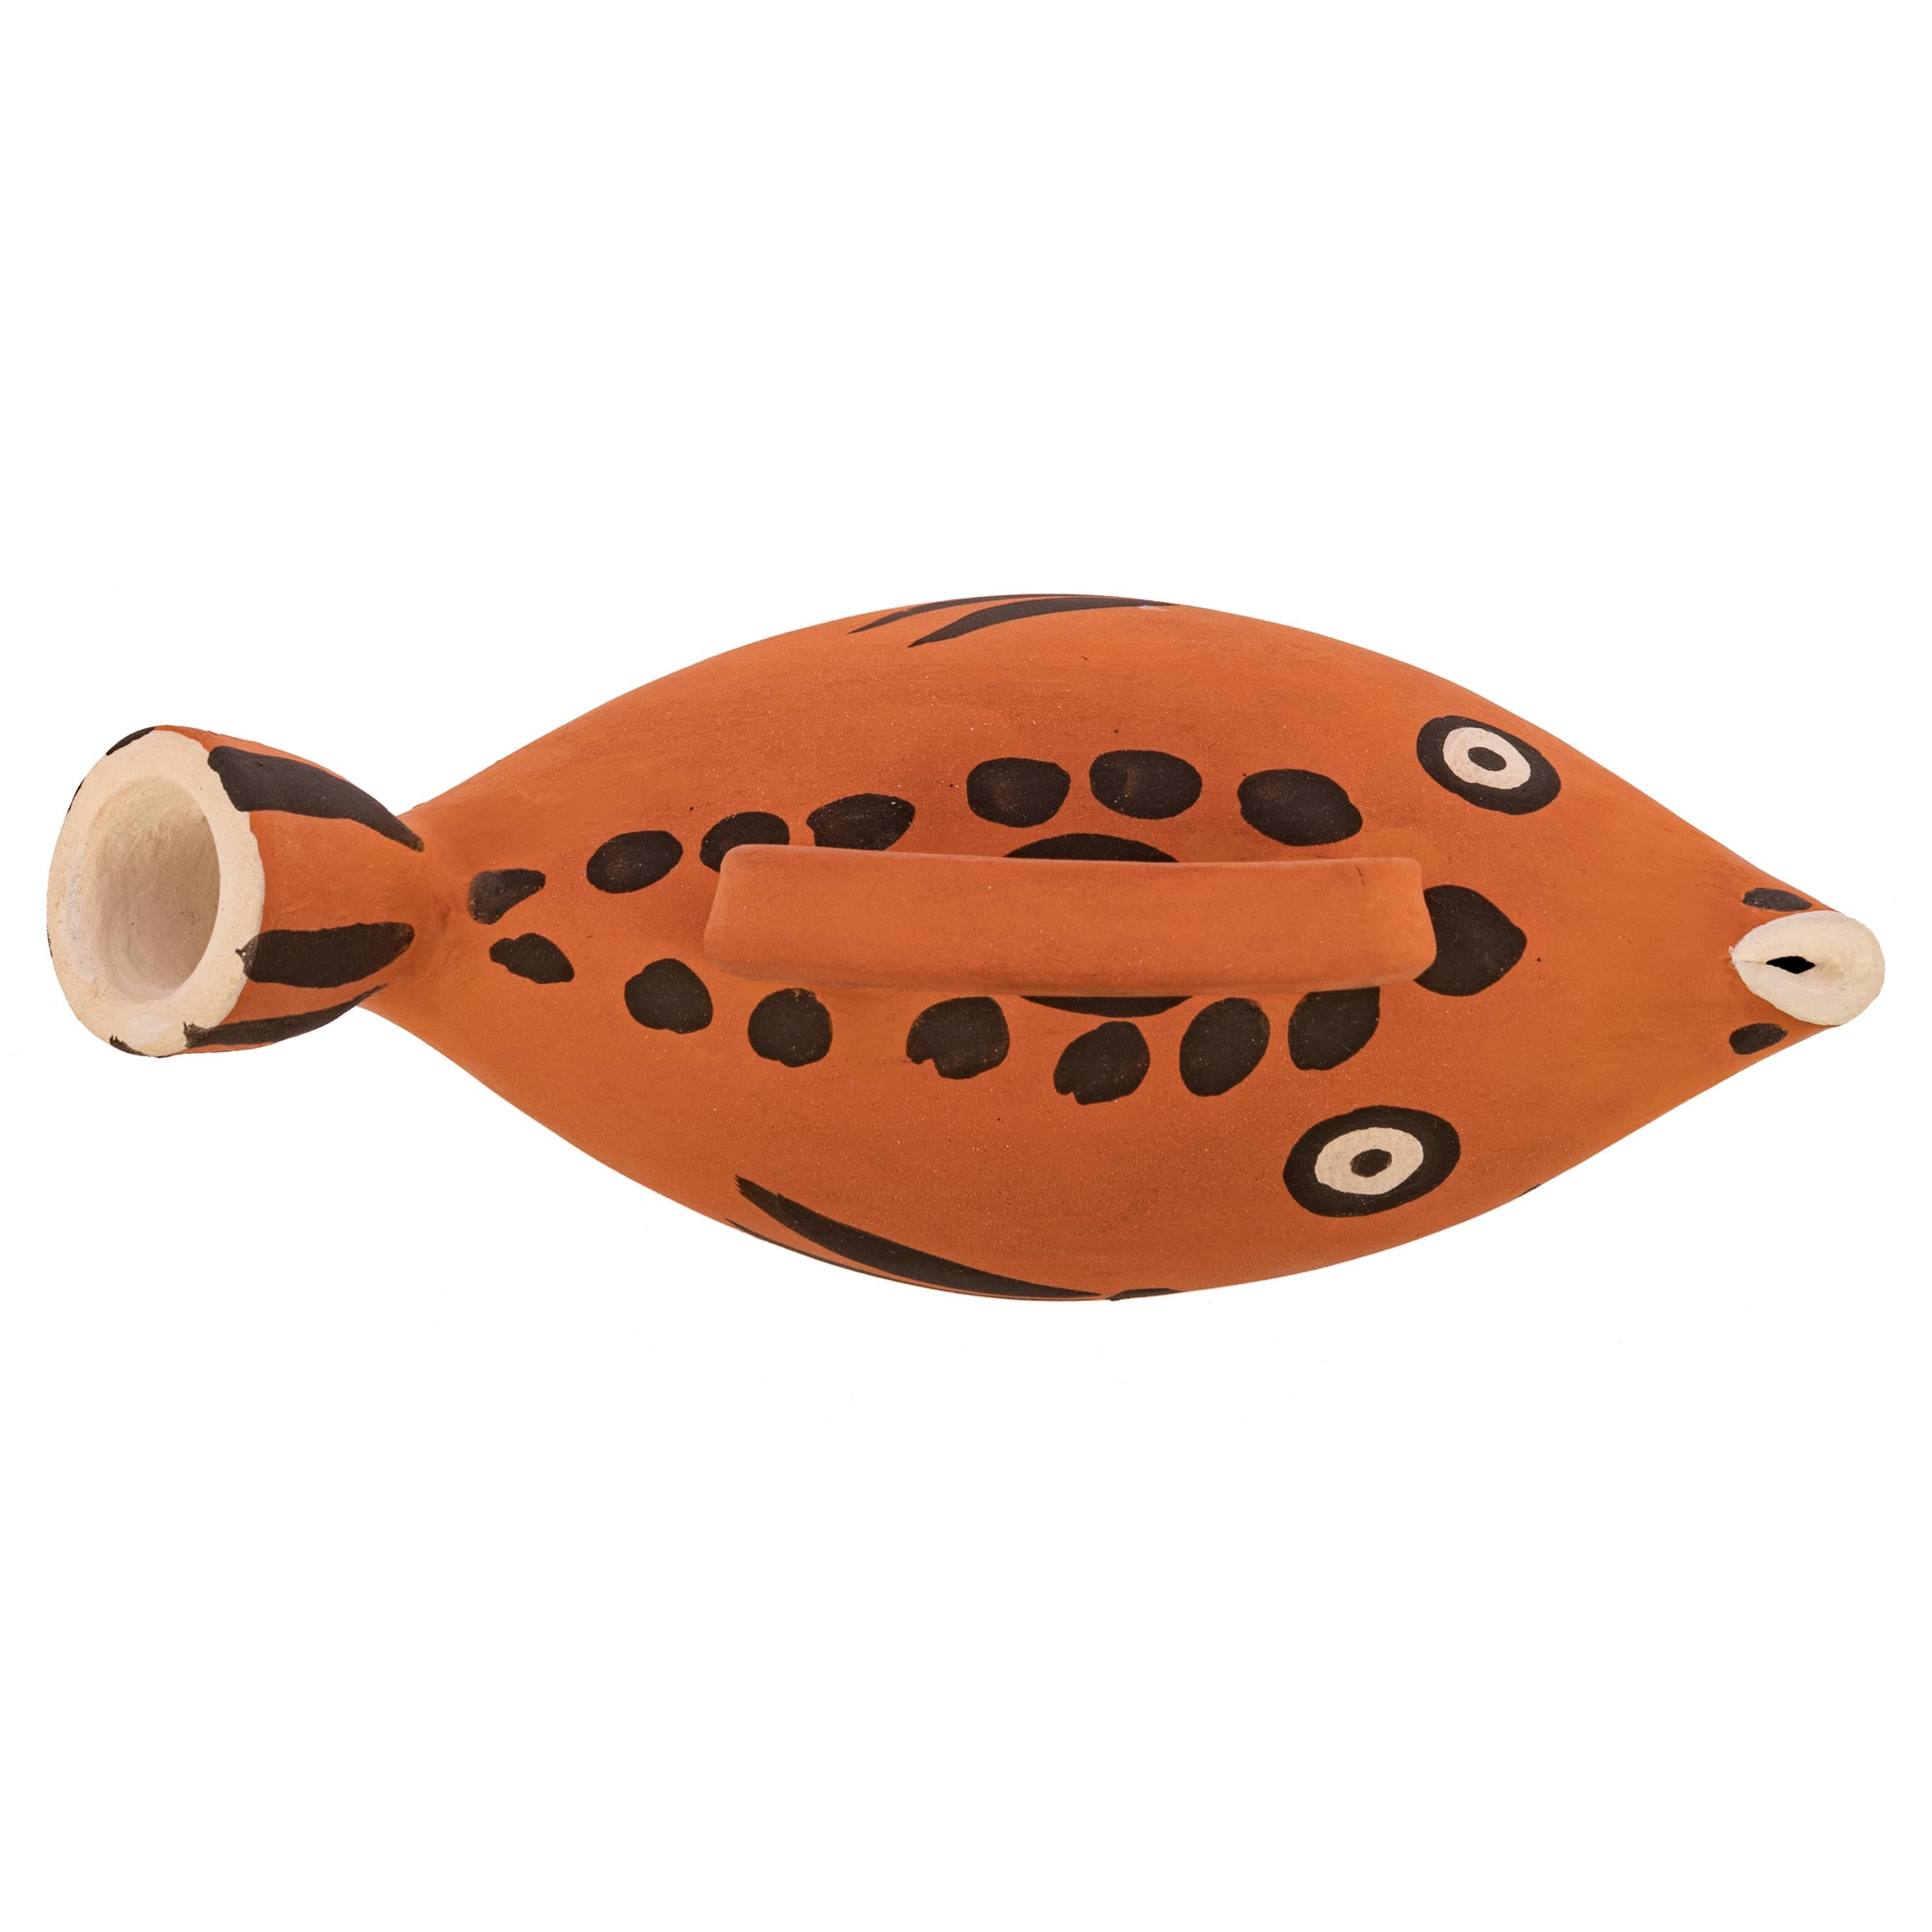 Pablo Picasso Terracotta Fish Pitcher Madoura Pottery Sujet Poisson France 1952  For Sale 4